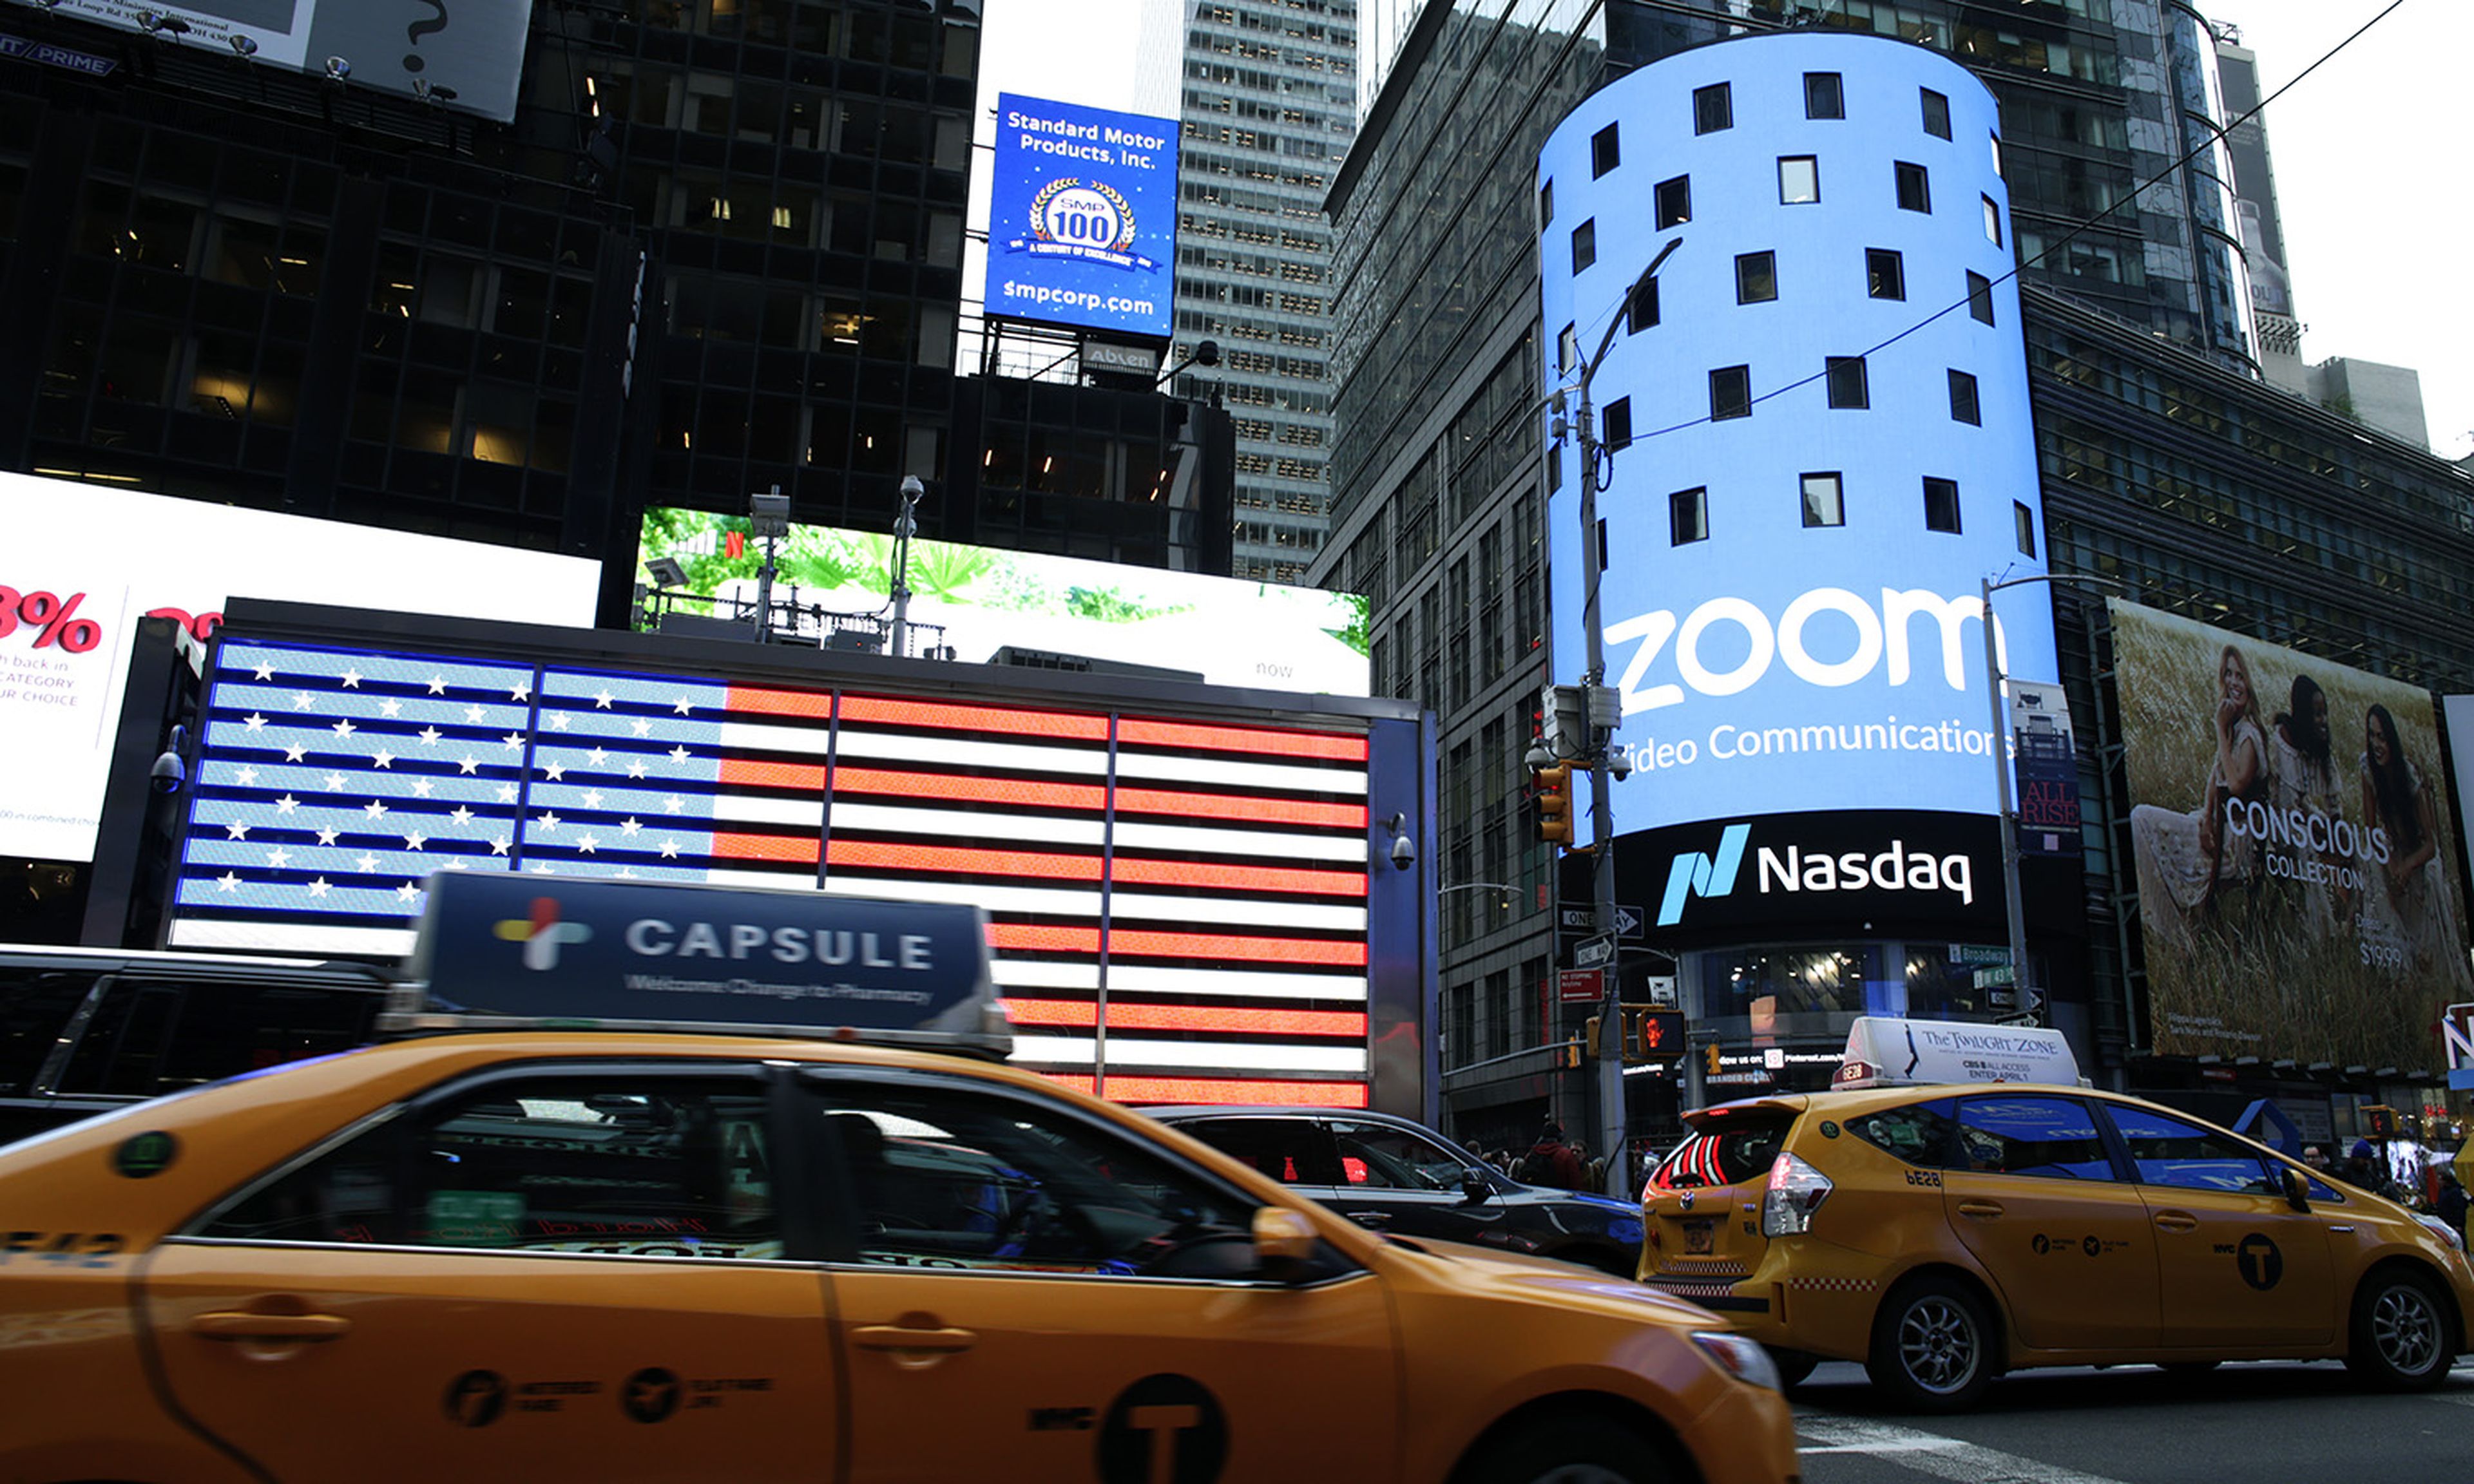 People pass by the Nasdaq building as the screen shows the logo of the video-conferencing software company Zoom on April 18, 2019, in New York City. (Photo by Kena Betancur/Getty Images)